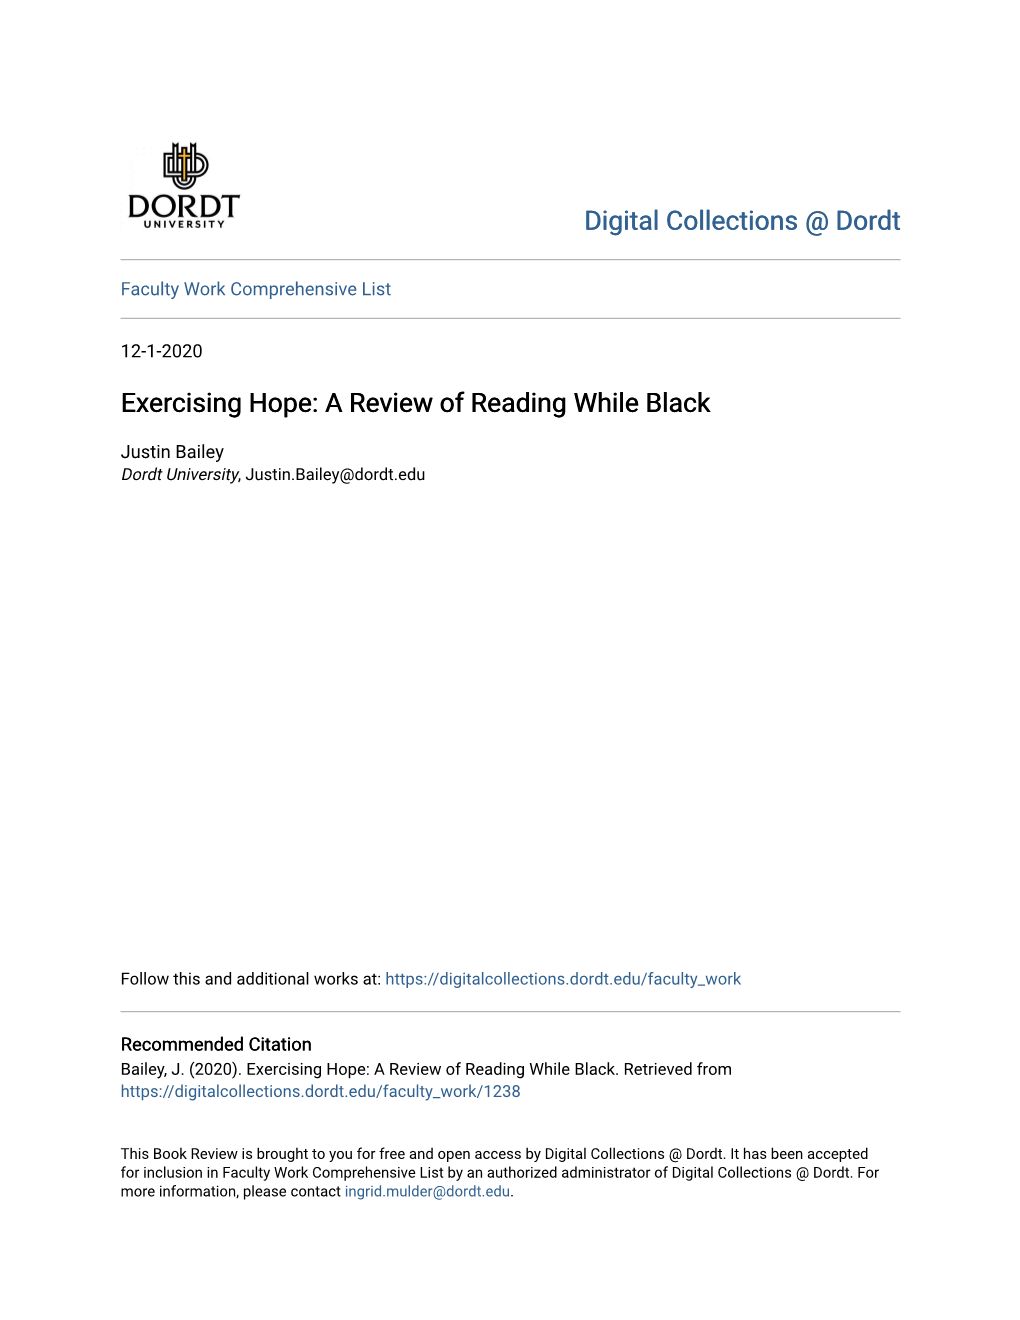 A Review of Reading While Black